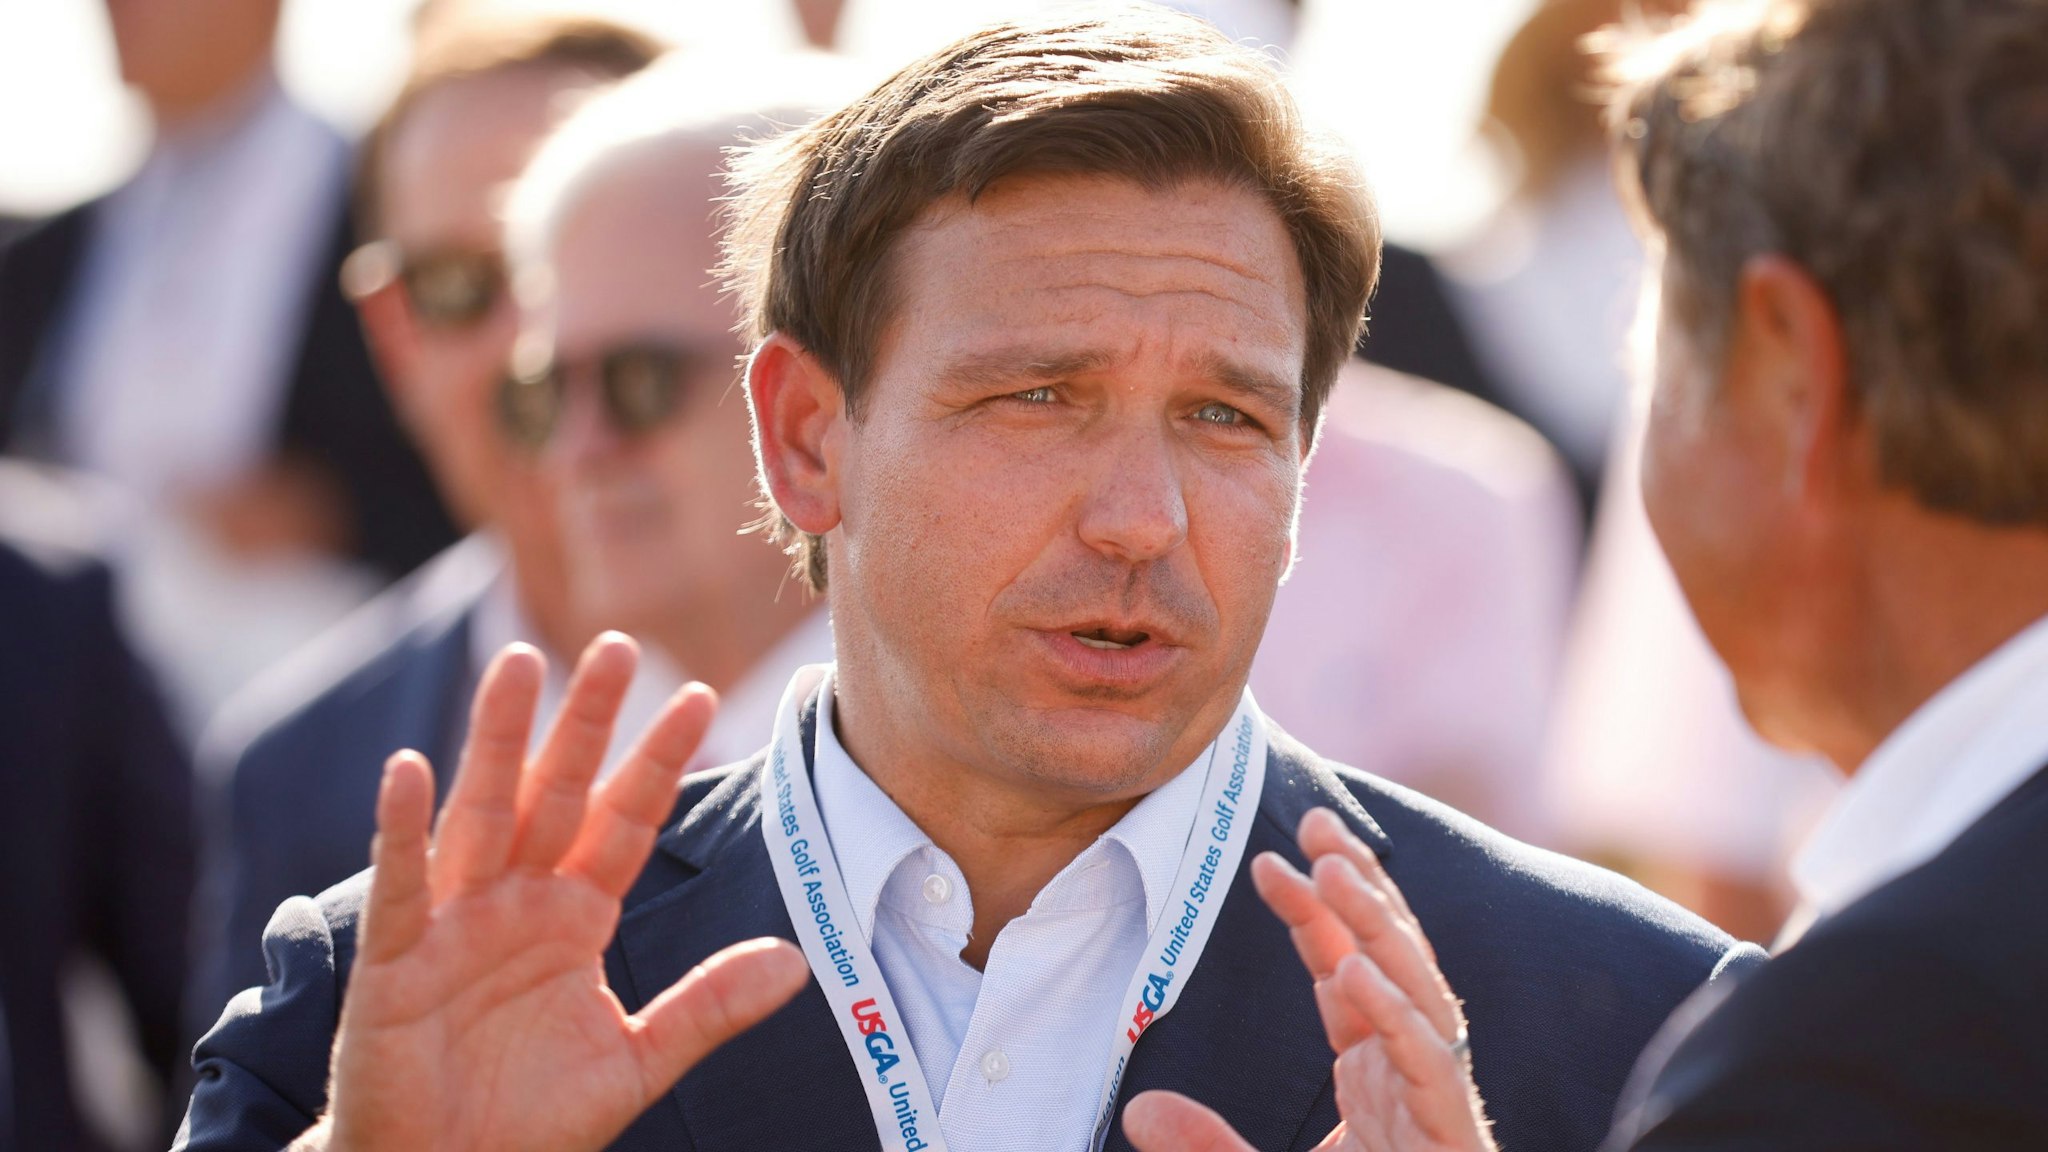 JUNO BEACH, FLORIDA - MAY 07: Florida Gov. Ron DeSantis attends the flag raising ceremony prior to The Walker Cup at Seminole Golf Club on May 07, 2021 in Juno Beach, Florida.